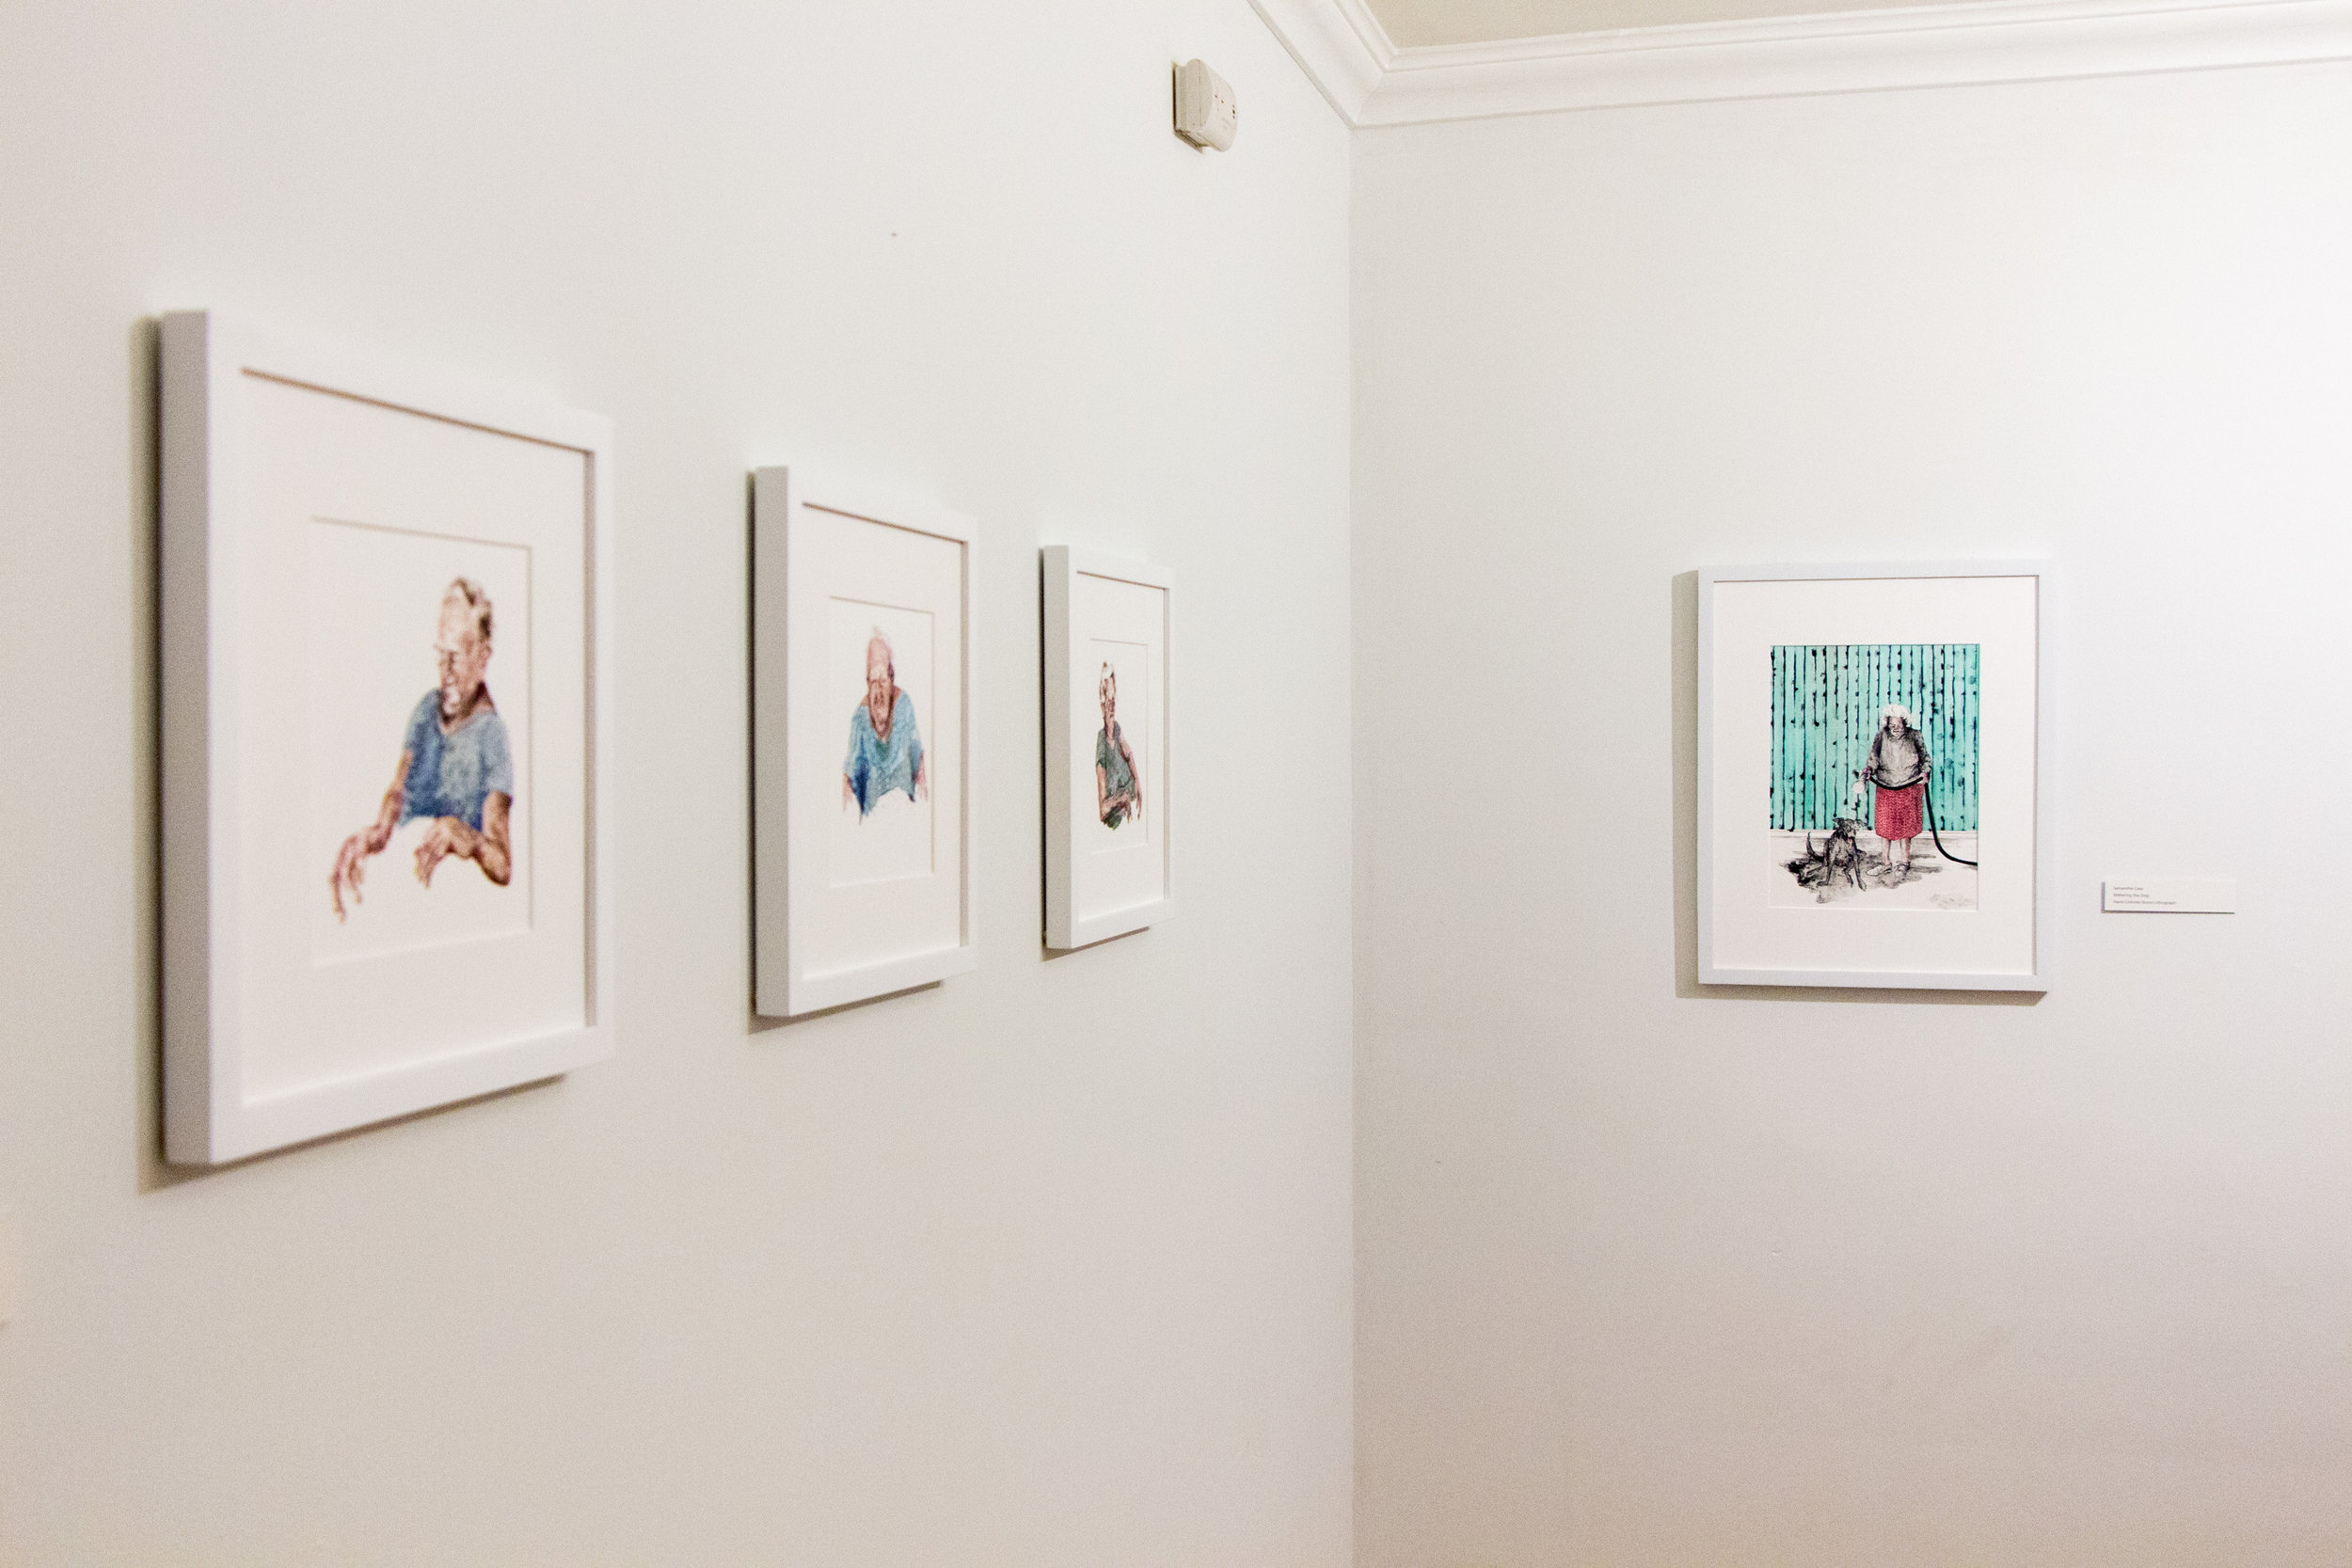  Installation Shot ,  Samantha Case  Gouche on Yupo Paper and Colored Lithograph 